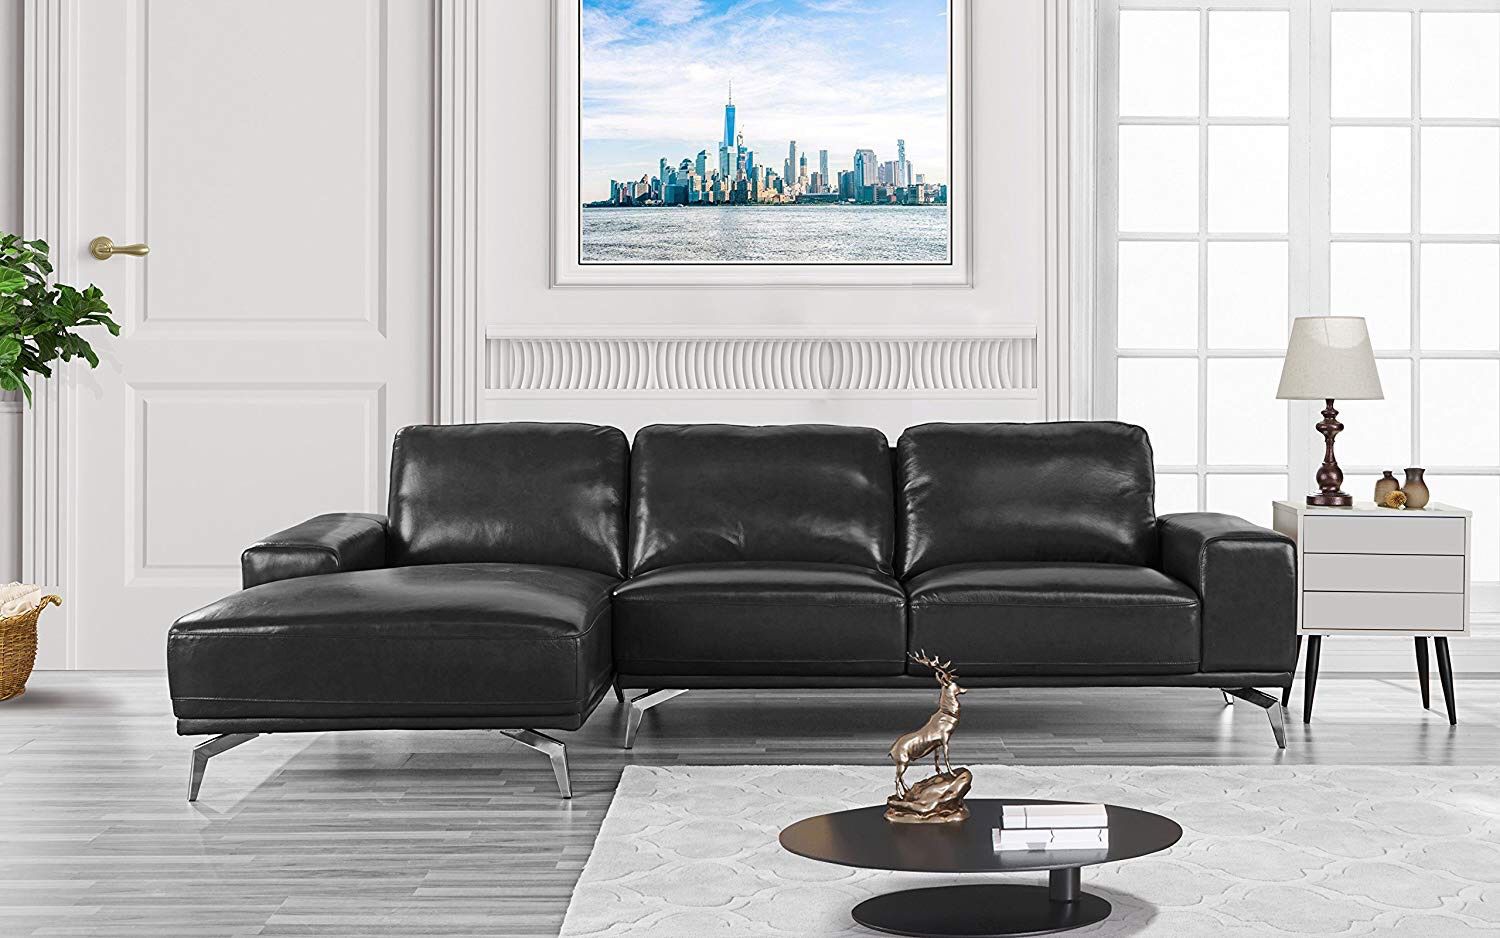 Divano Roma Furniture - Modern Real Leather Sectional Sofa, L-Shape Couch w/Chaise on Left (Black)